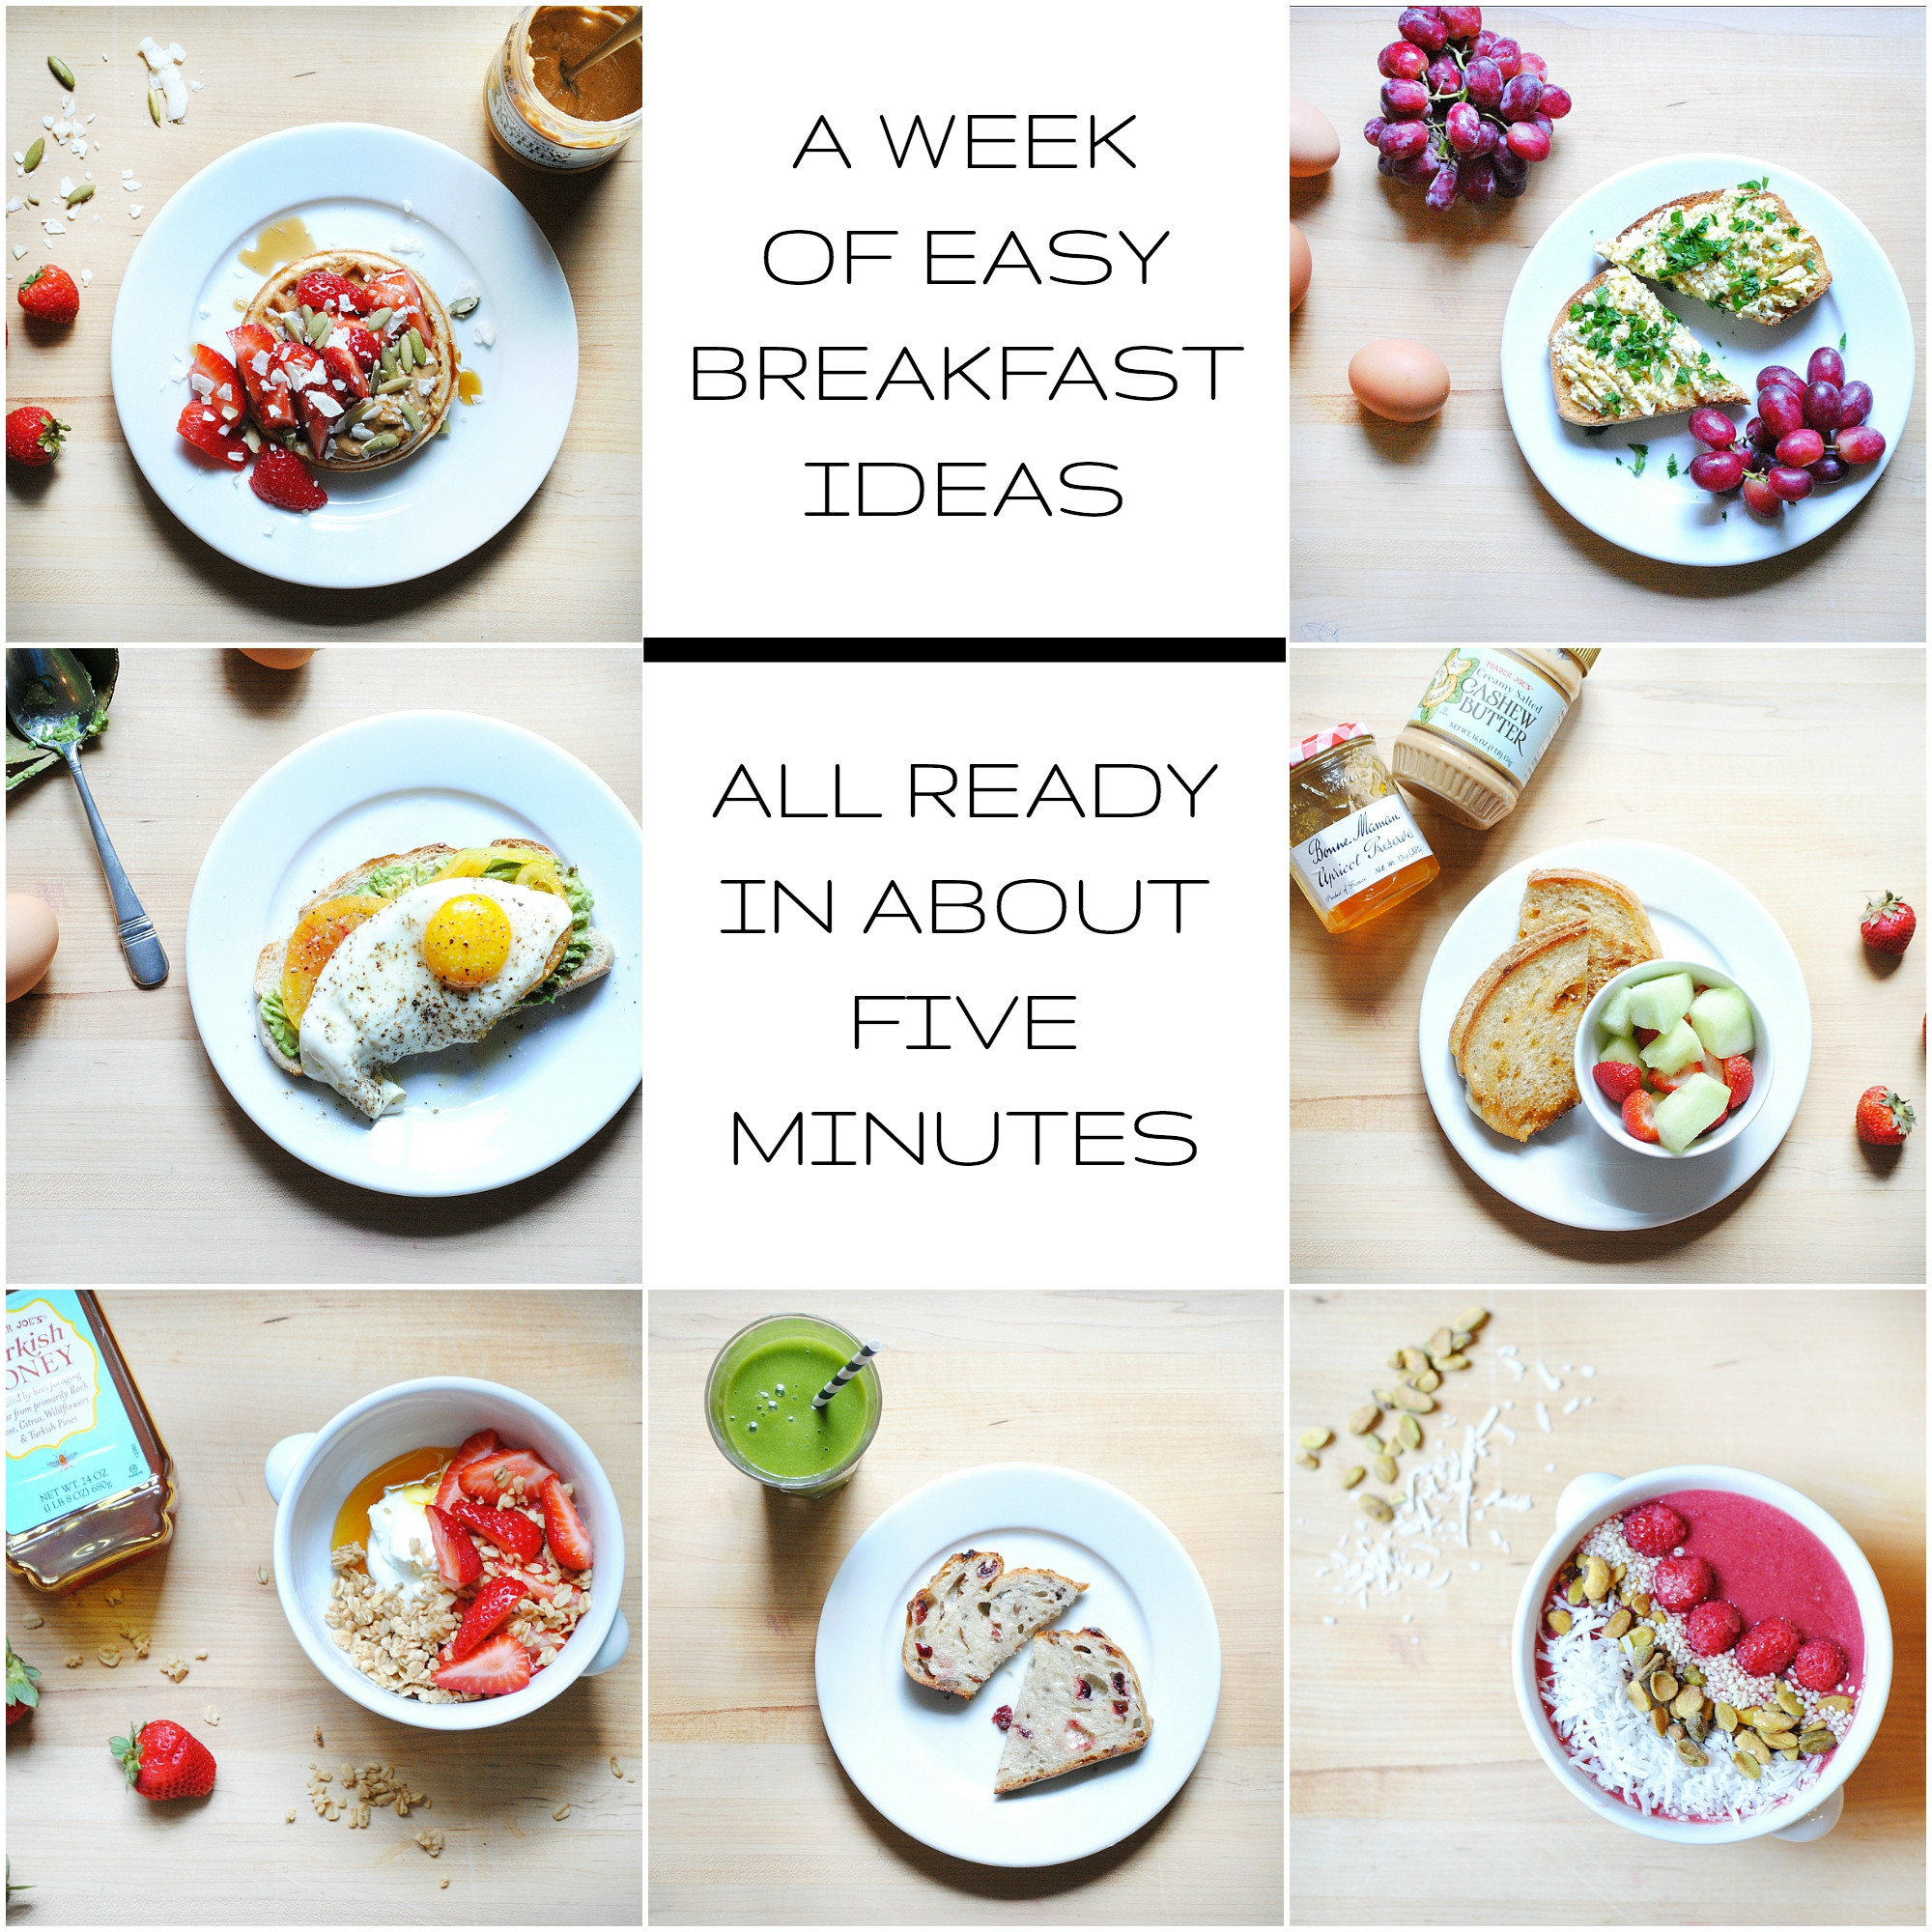 Easy And Healthy Breakfast Ideas
 A Week of Healthy Easy Breakfast Ideas All Ready in